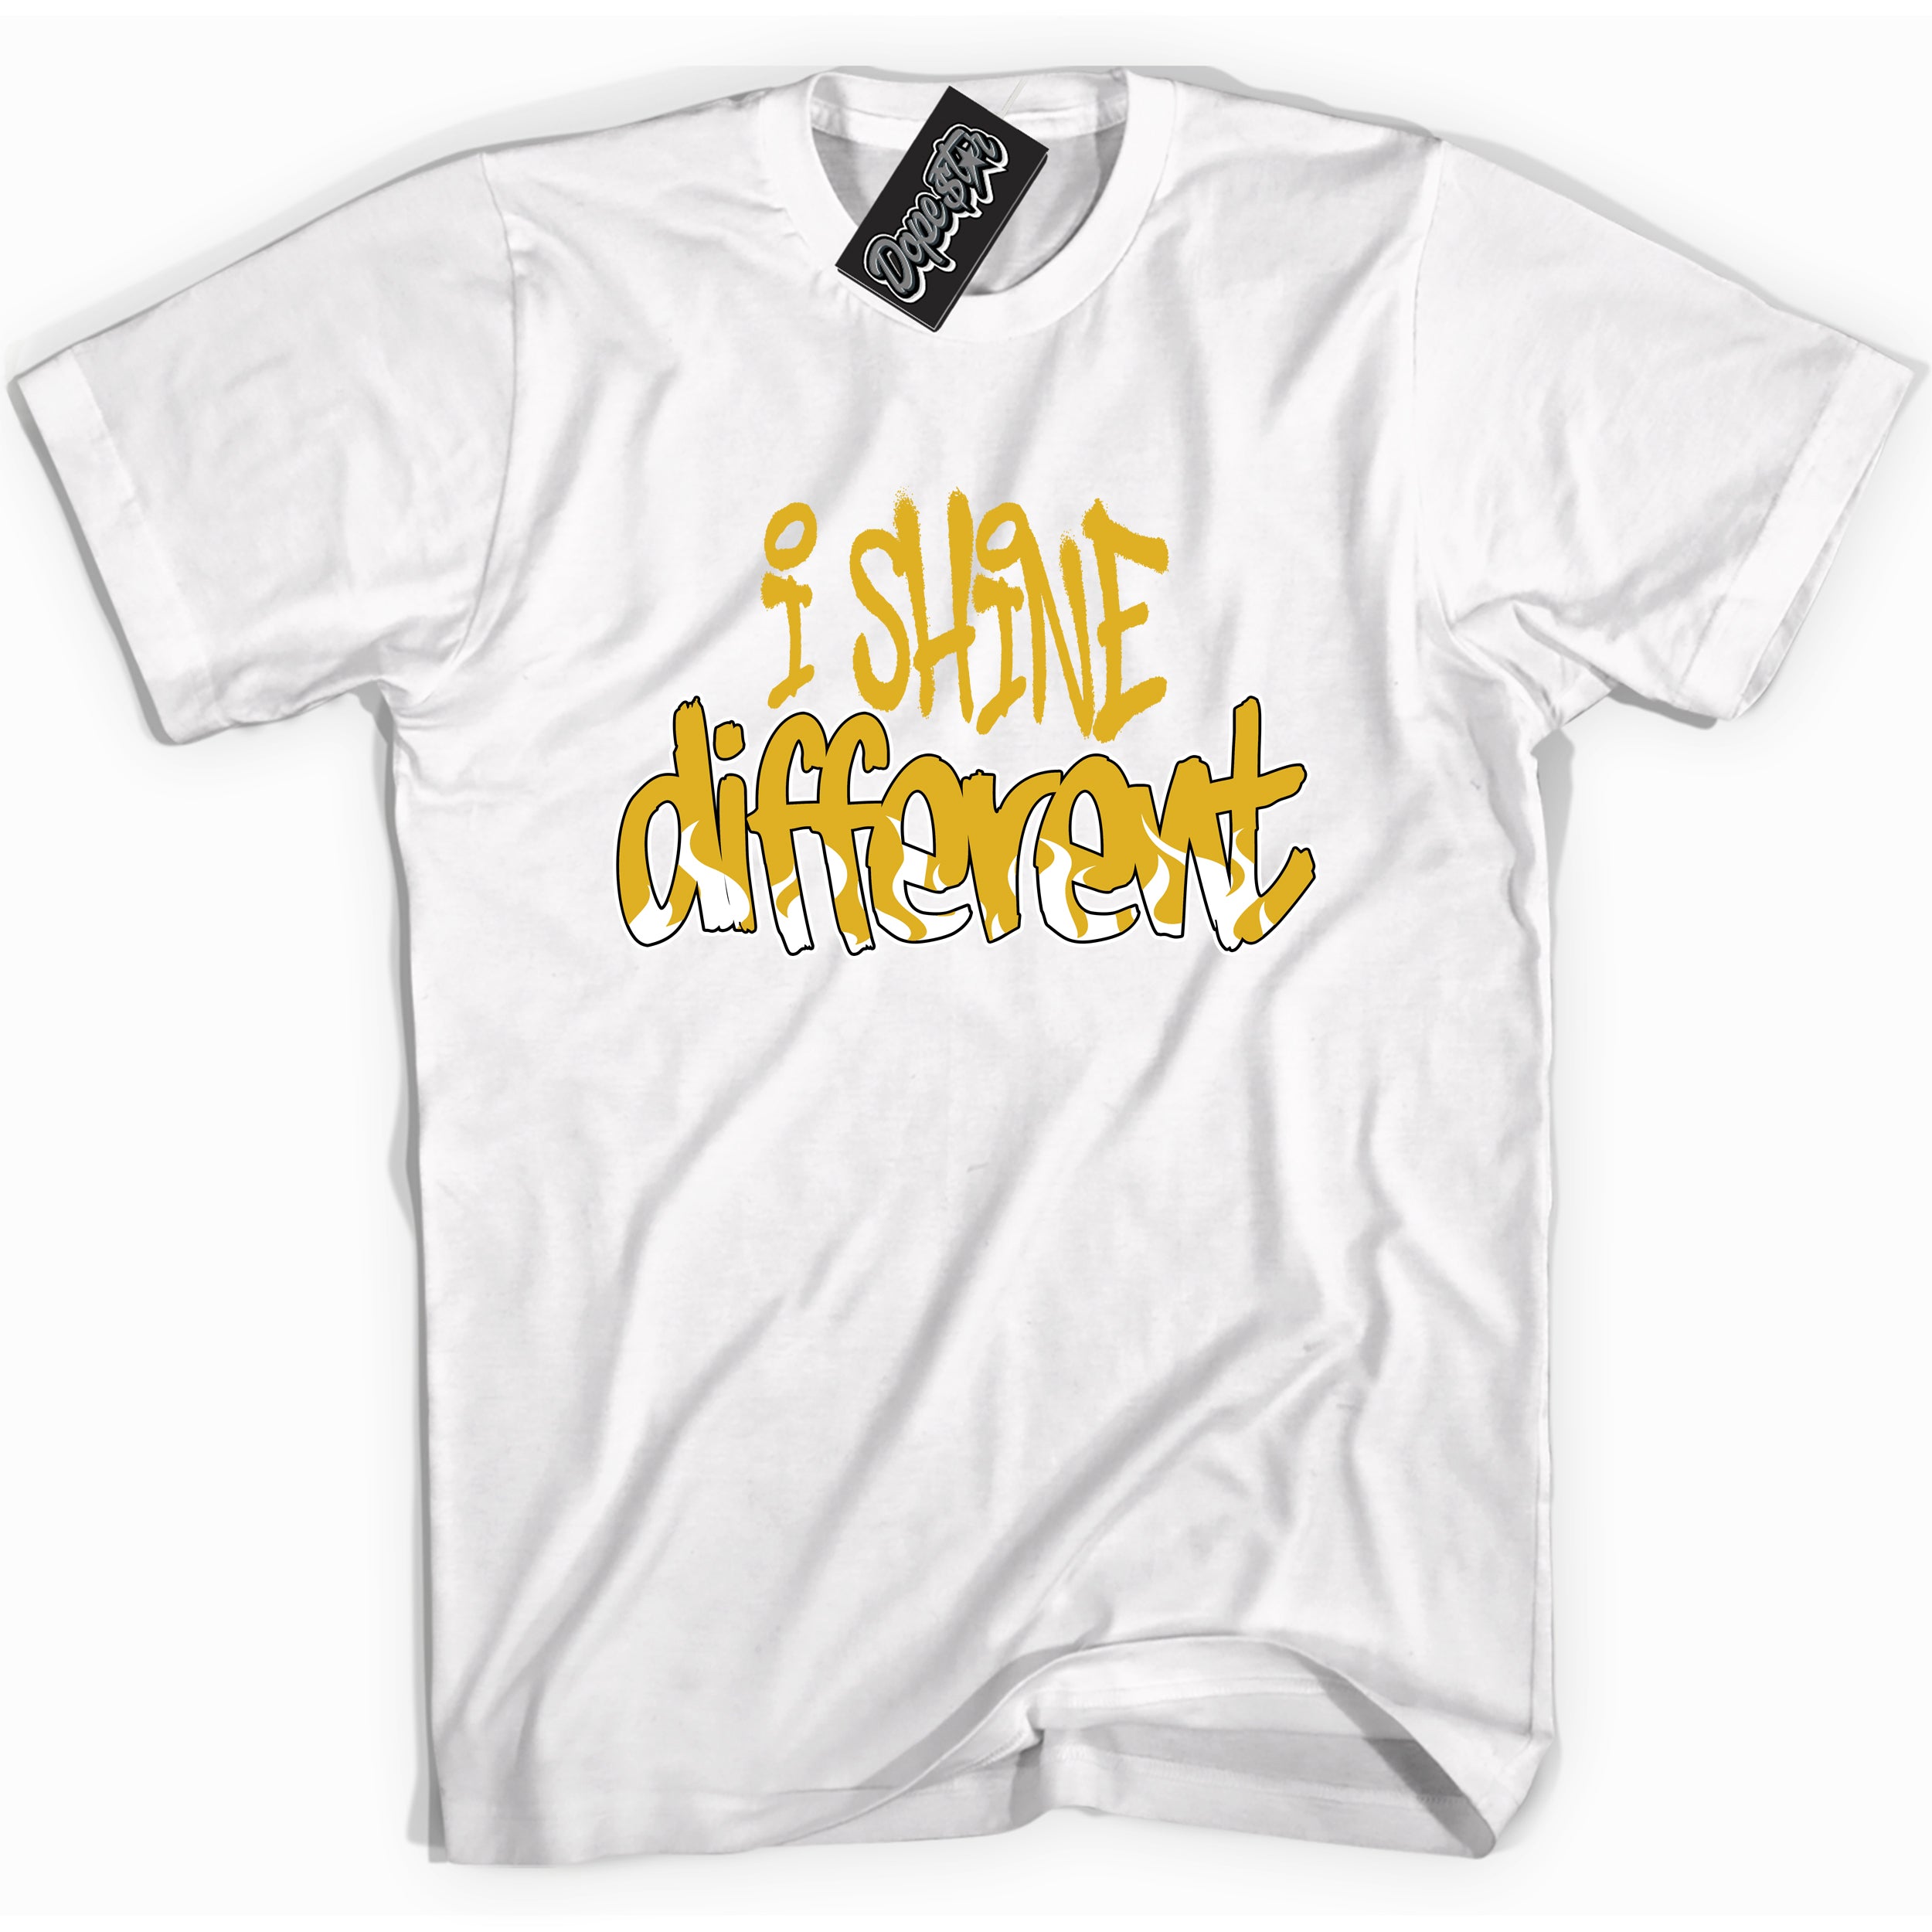 Cool White Shirt with “ I Shine Different” design that perfectly matches Yellow Ochre 6s Sneakers.